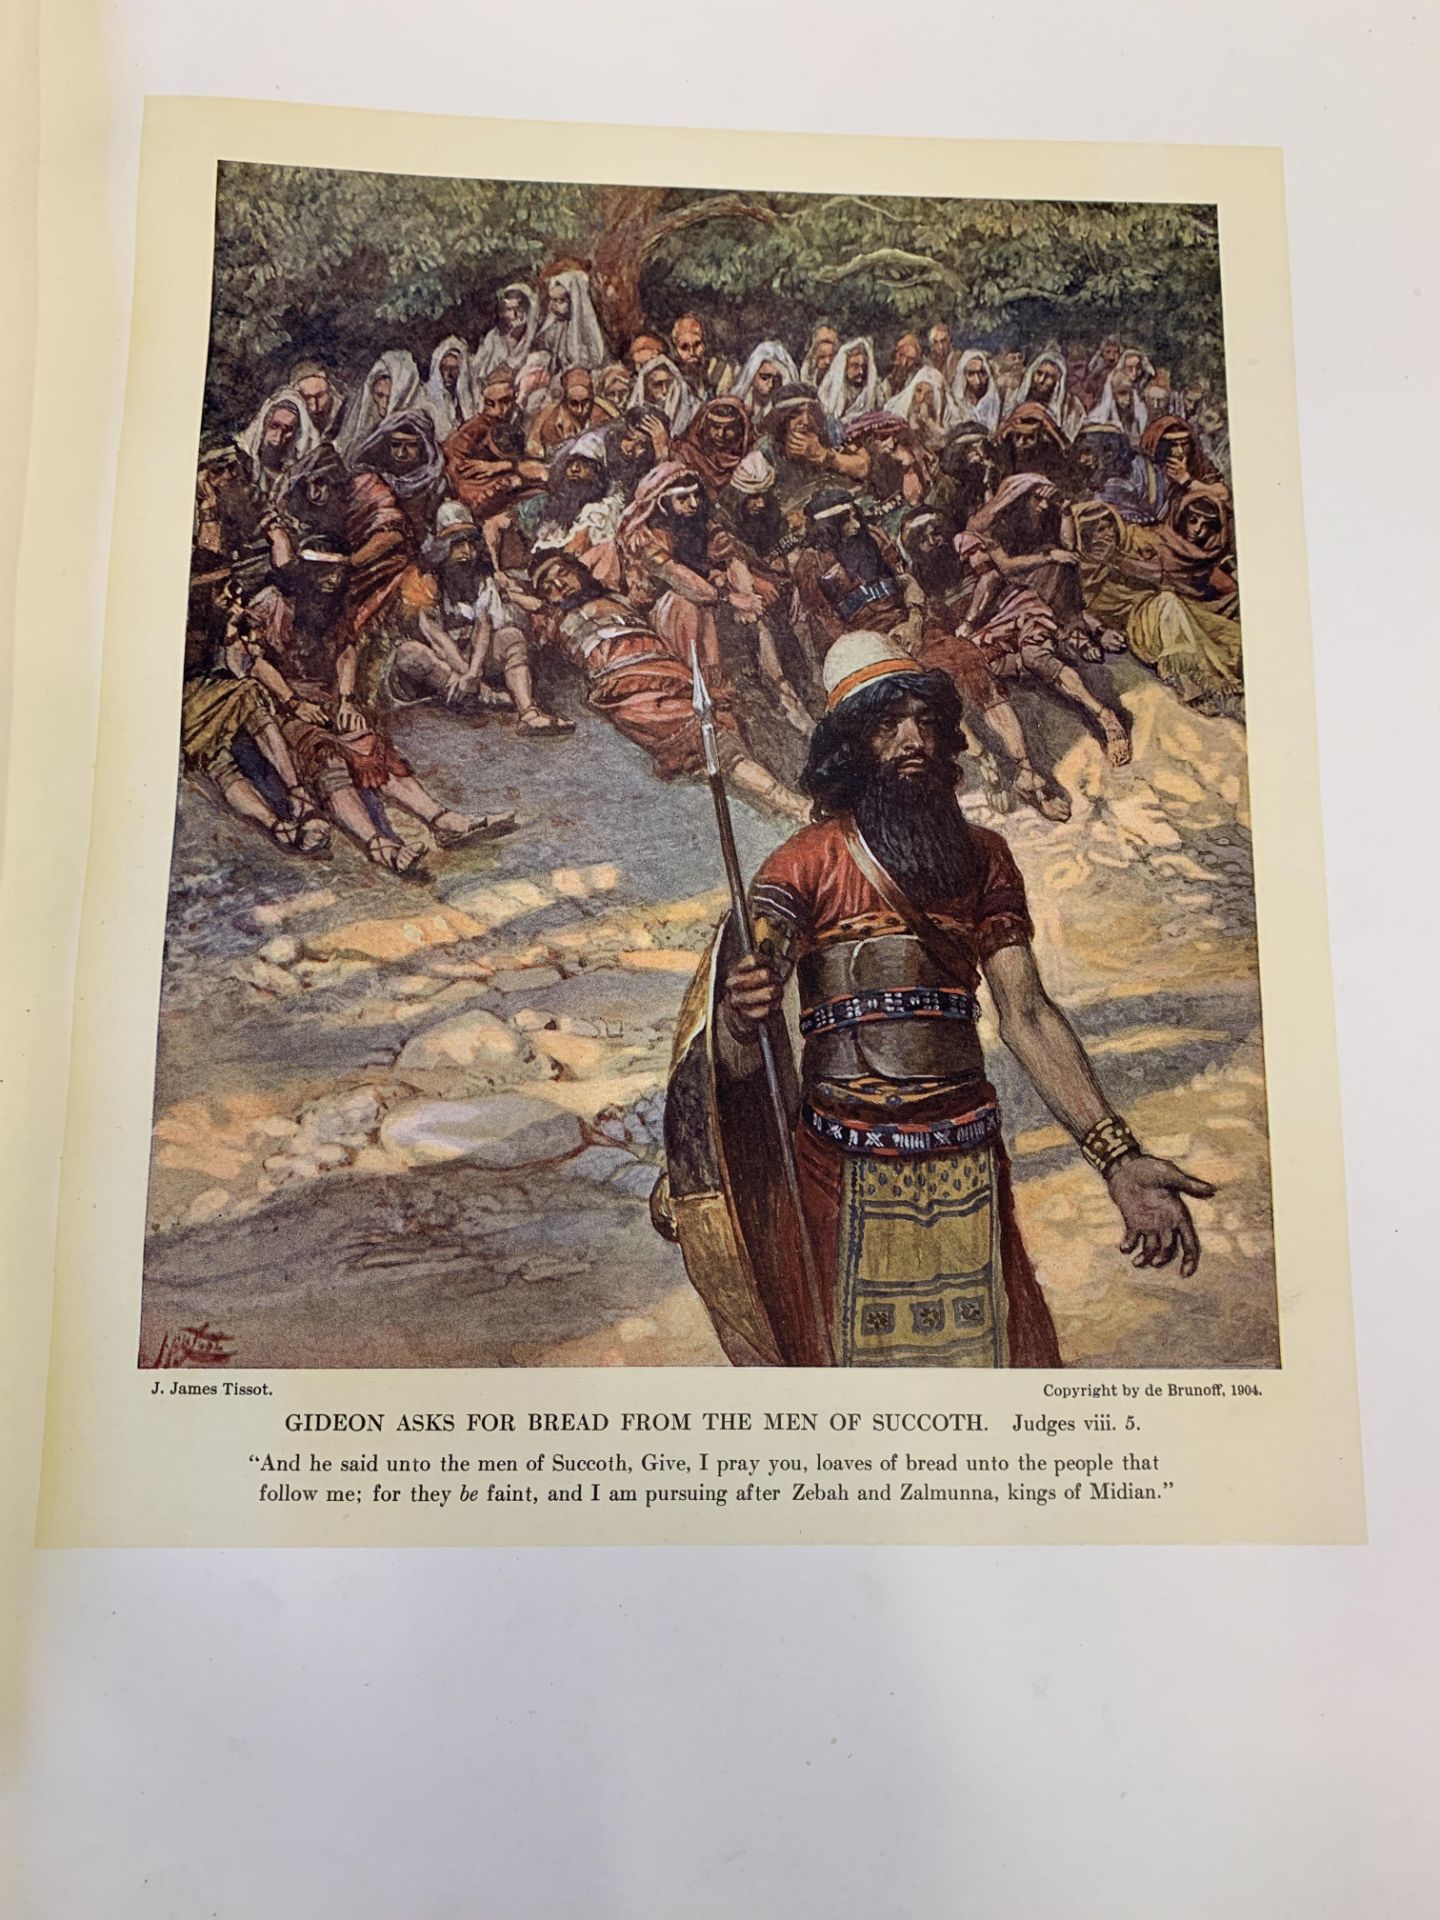 Illustrated Family Bible and the Old Testament illustrated by J James Tissot, 1904 - Image 8 of 8